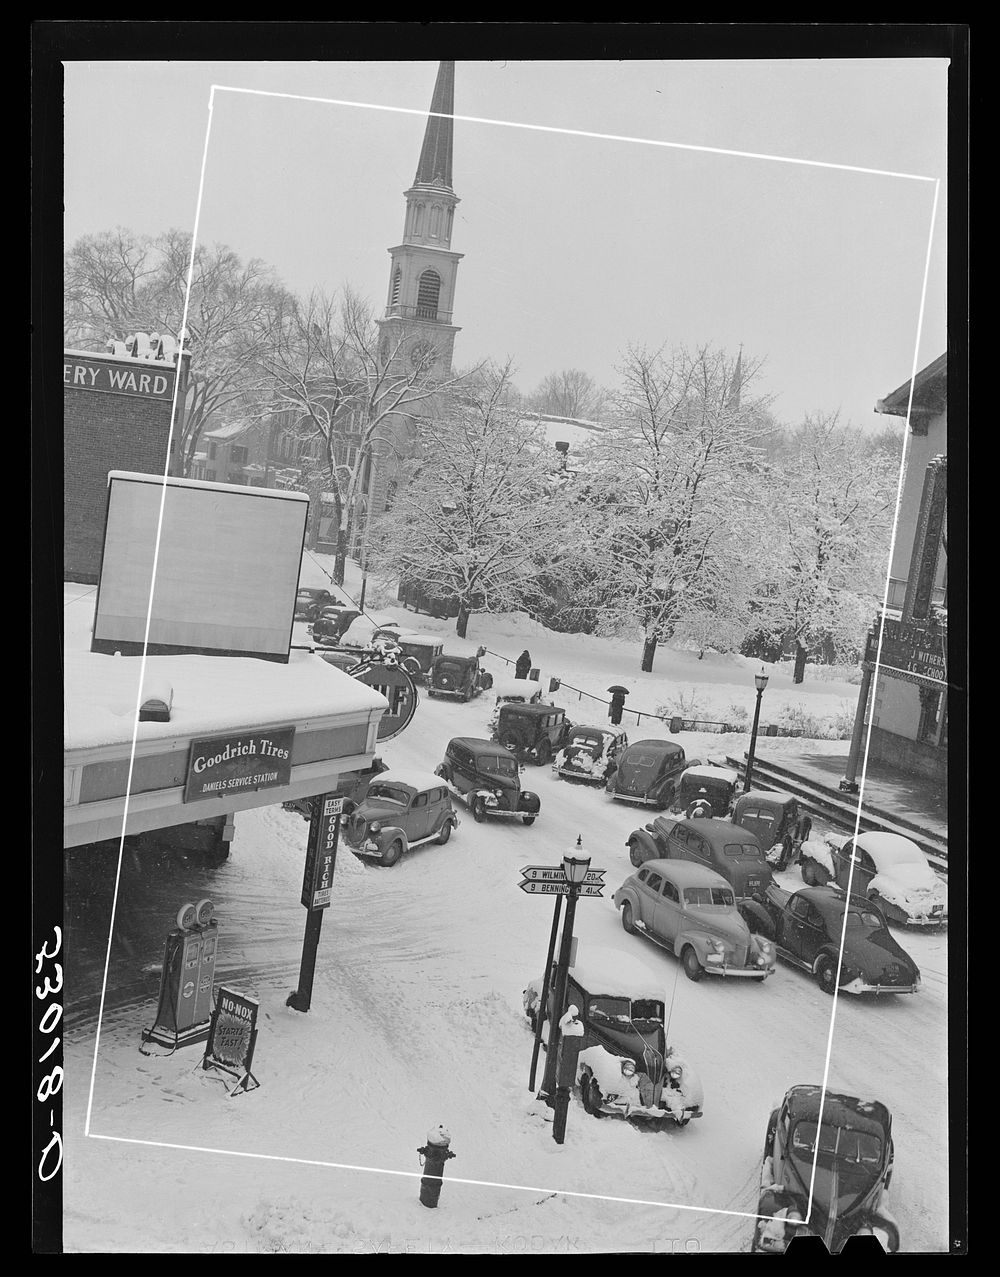 Corner of main street, center of town after blizzard, Brattleboro, Vermont. Sourced from the Library of Congress.